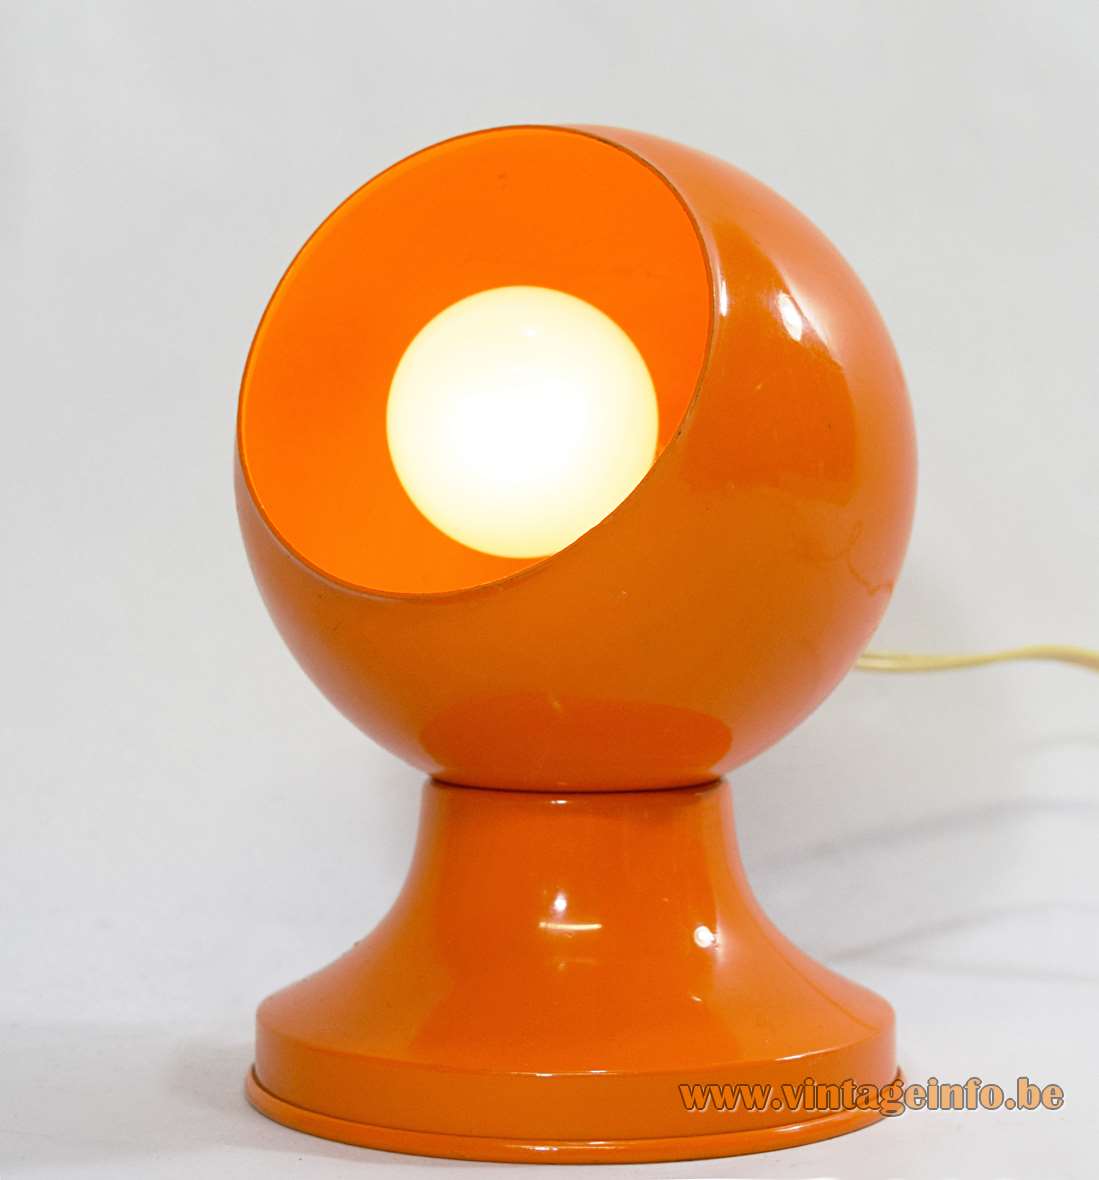 Varec magnetic table lamp with an orange base and globe E14 socket eclipse style 1960s 1970s